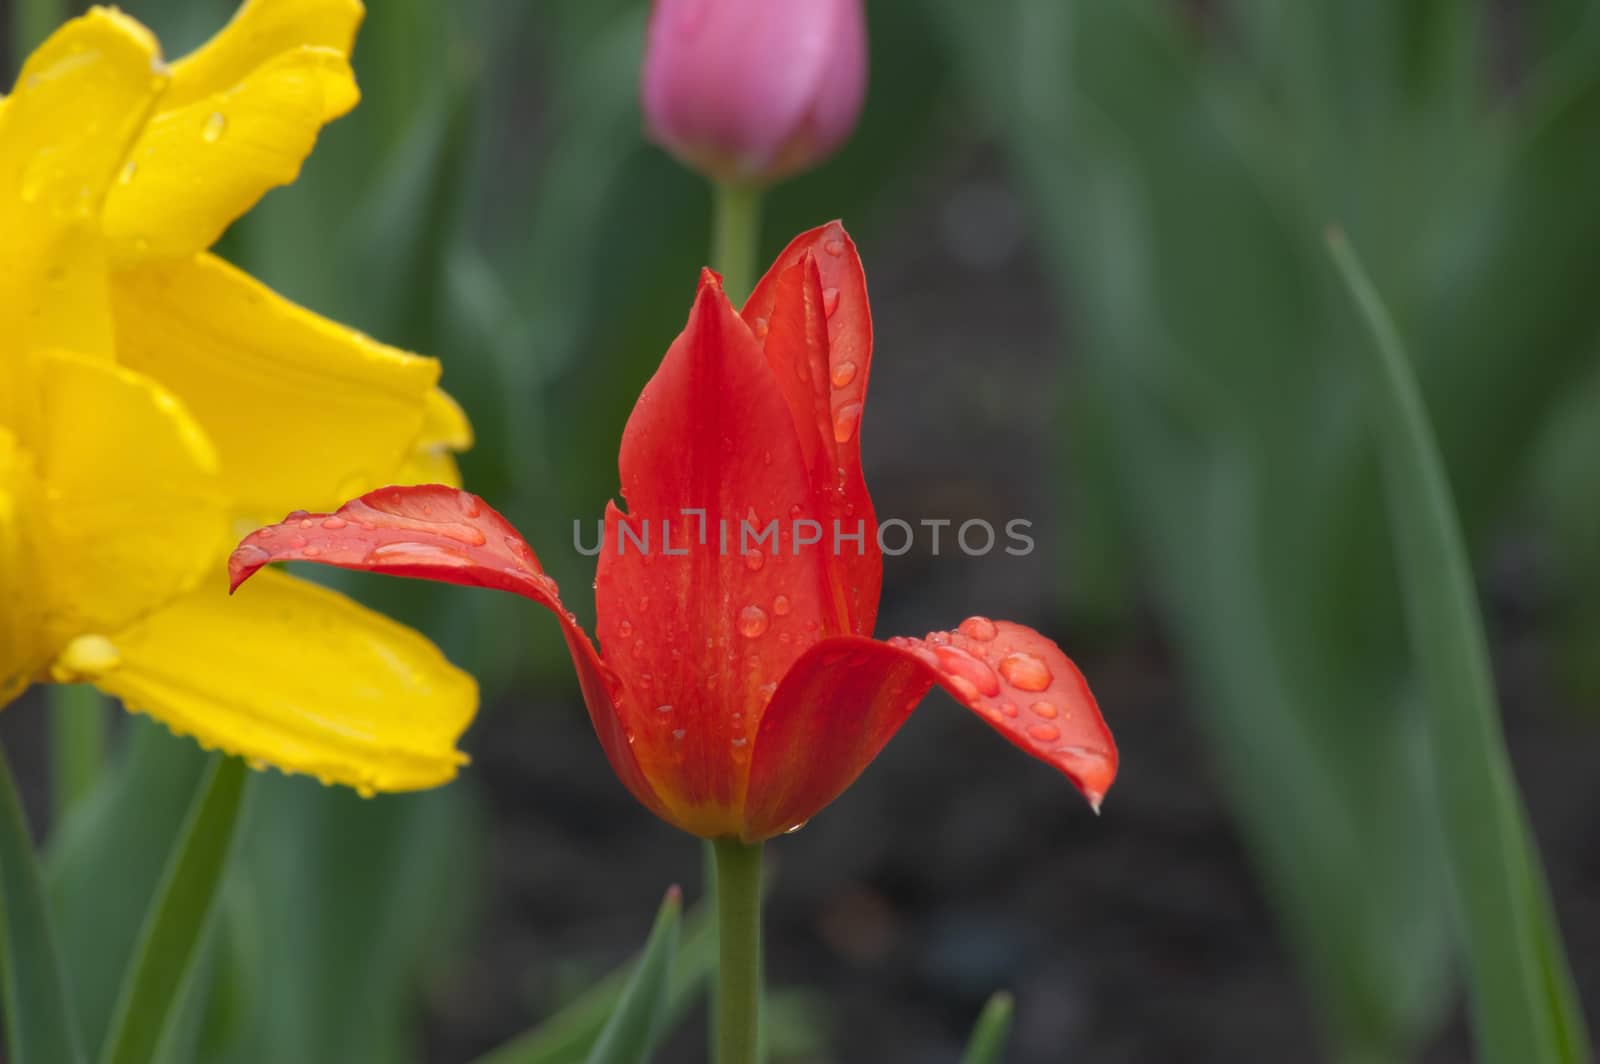 close up of pink and yellow tulip on flowerbed. Veronique sanson